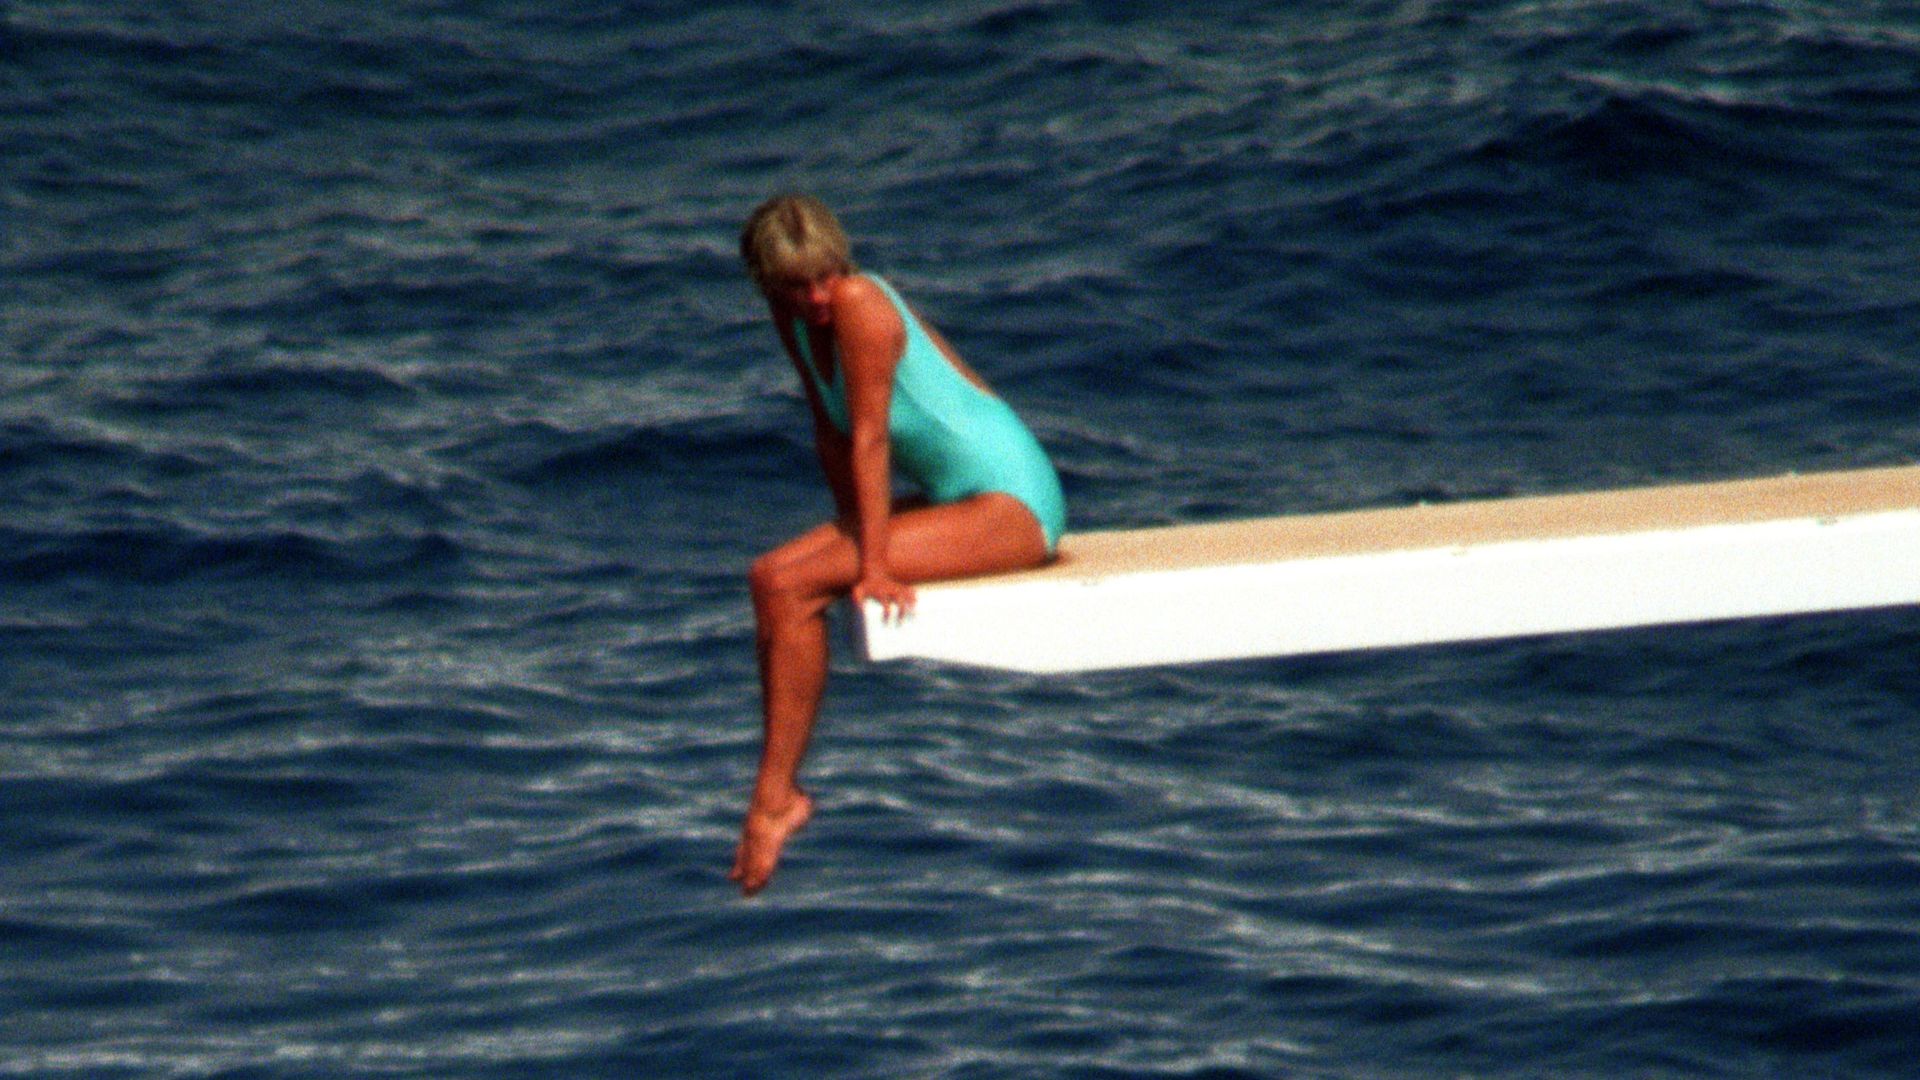 Princess Diana in a blue swimsuit sat on a diving board with the sea beneath her